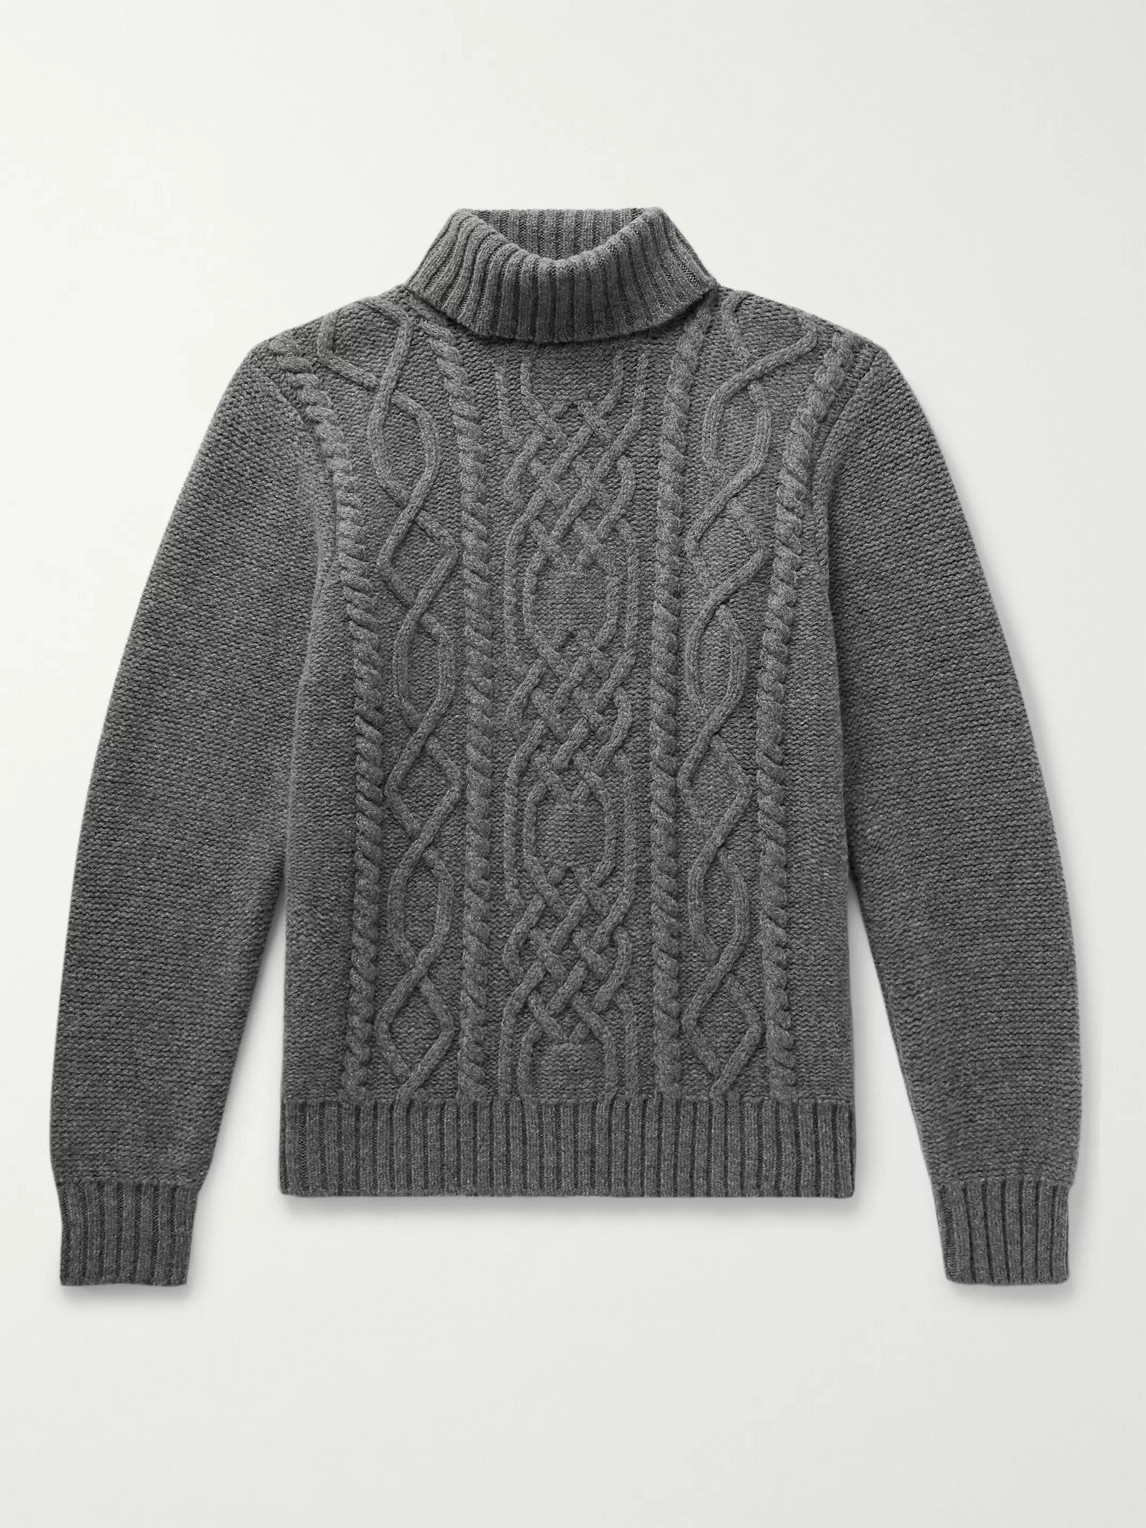 Inis Meain Celebration Cable-knit Merino Wool Rollneck Sweater In Gray